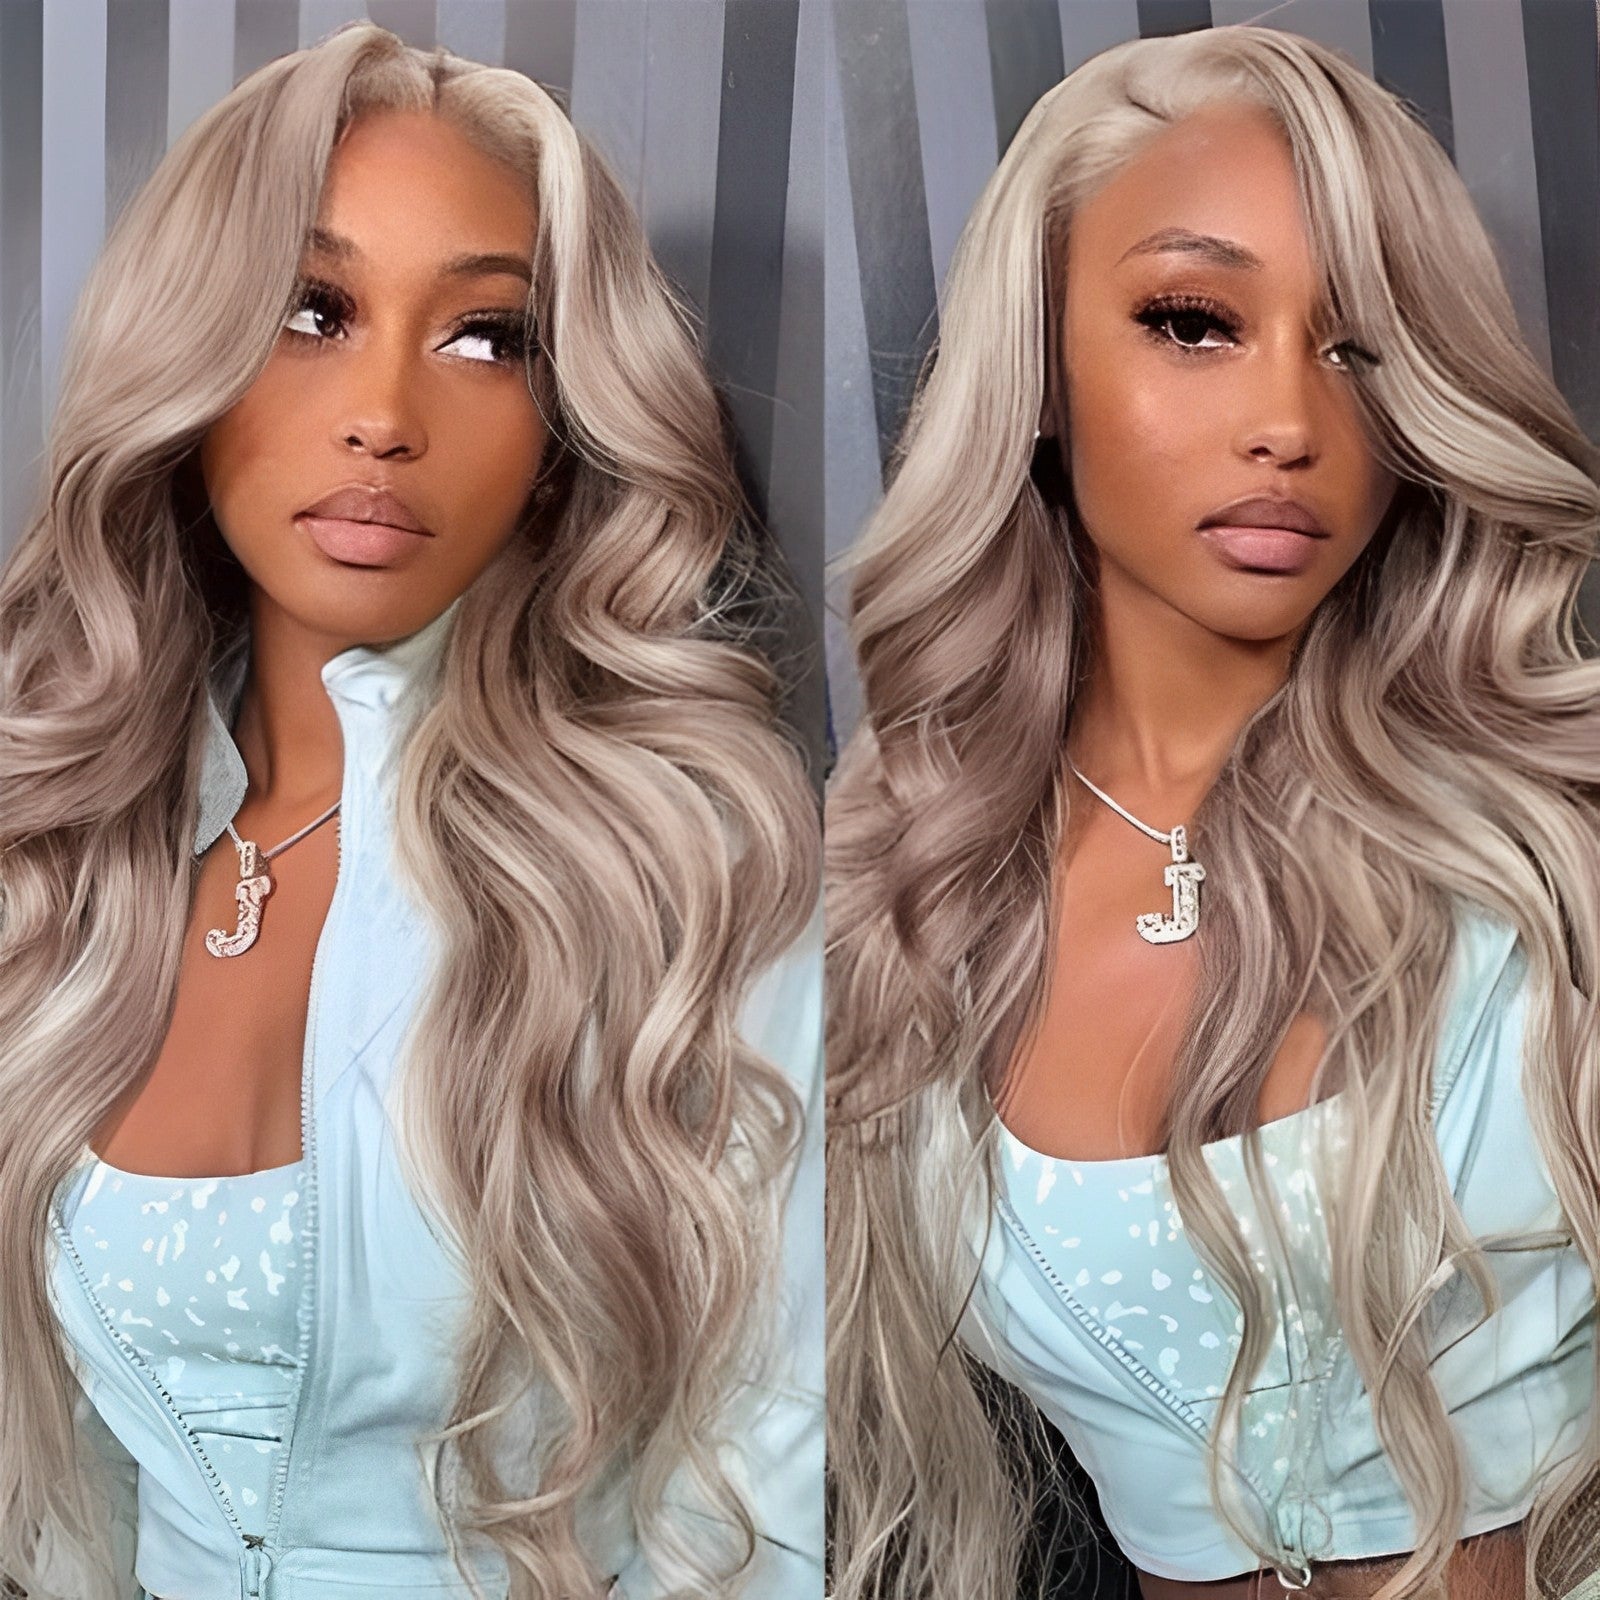 Gluna Hair Exclusive Original Blonde Highlight 18/613 Clored Lace Front Human Hair Wigs